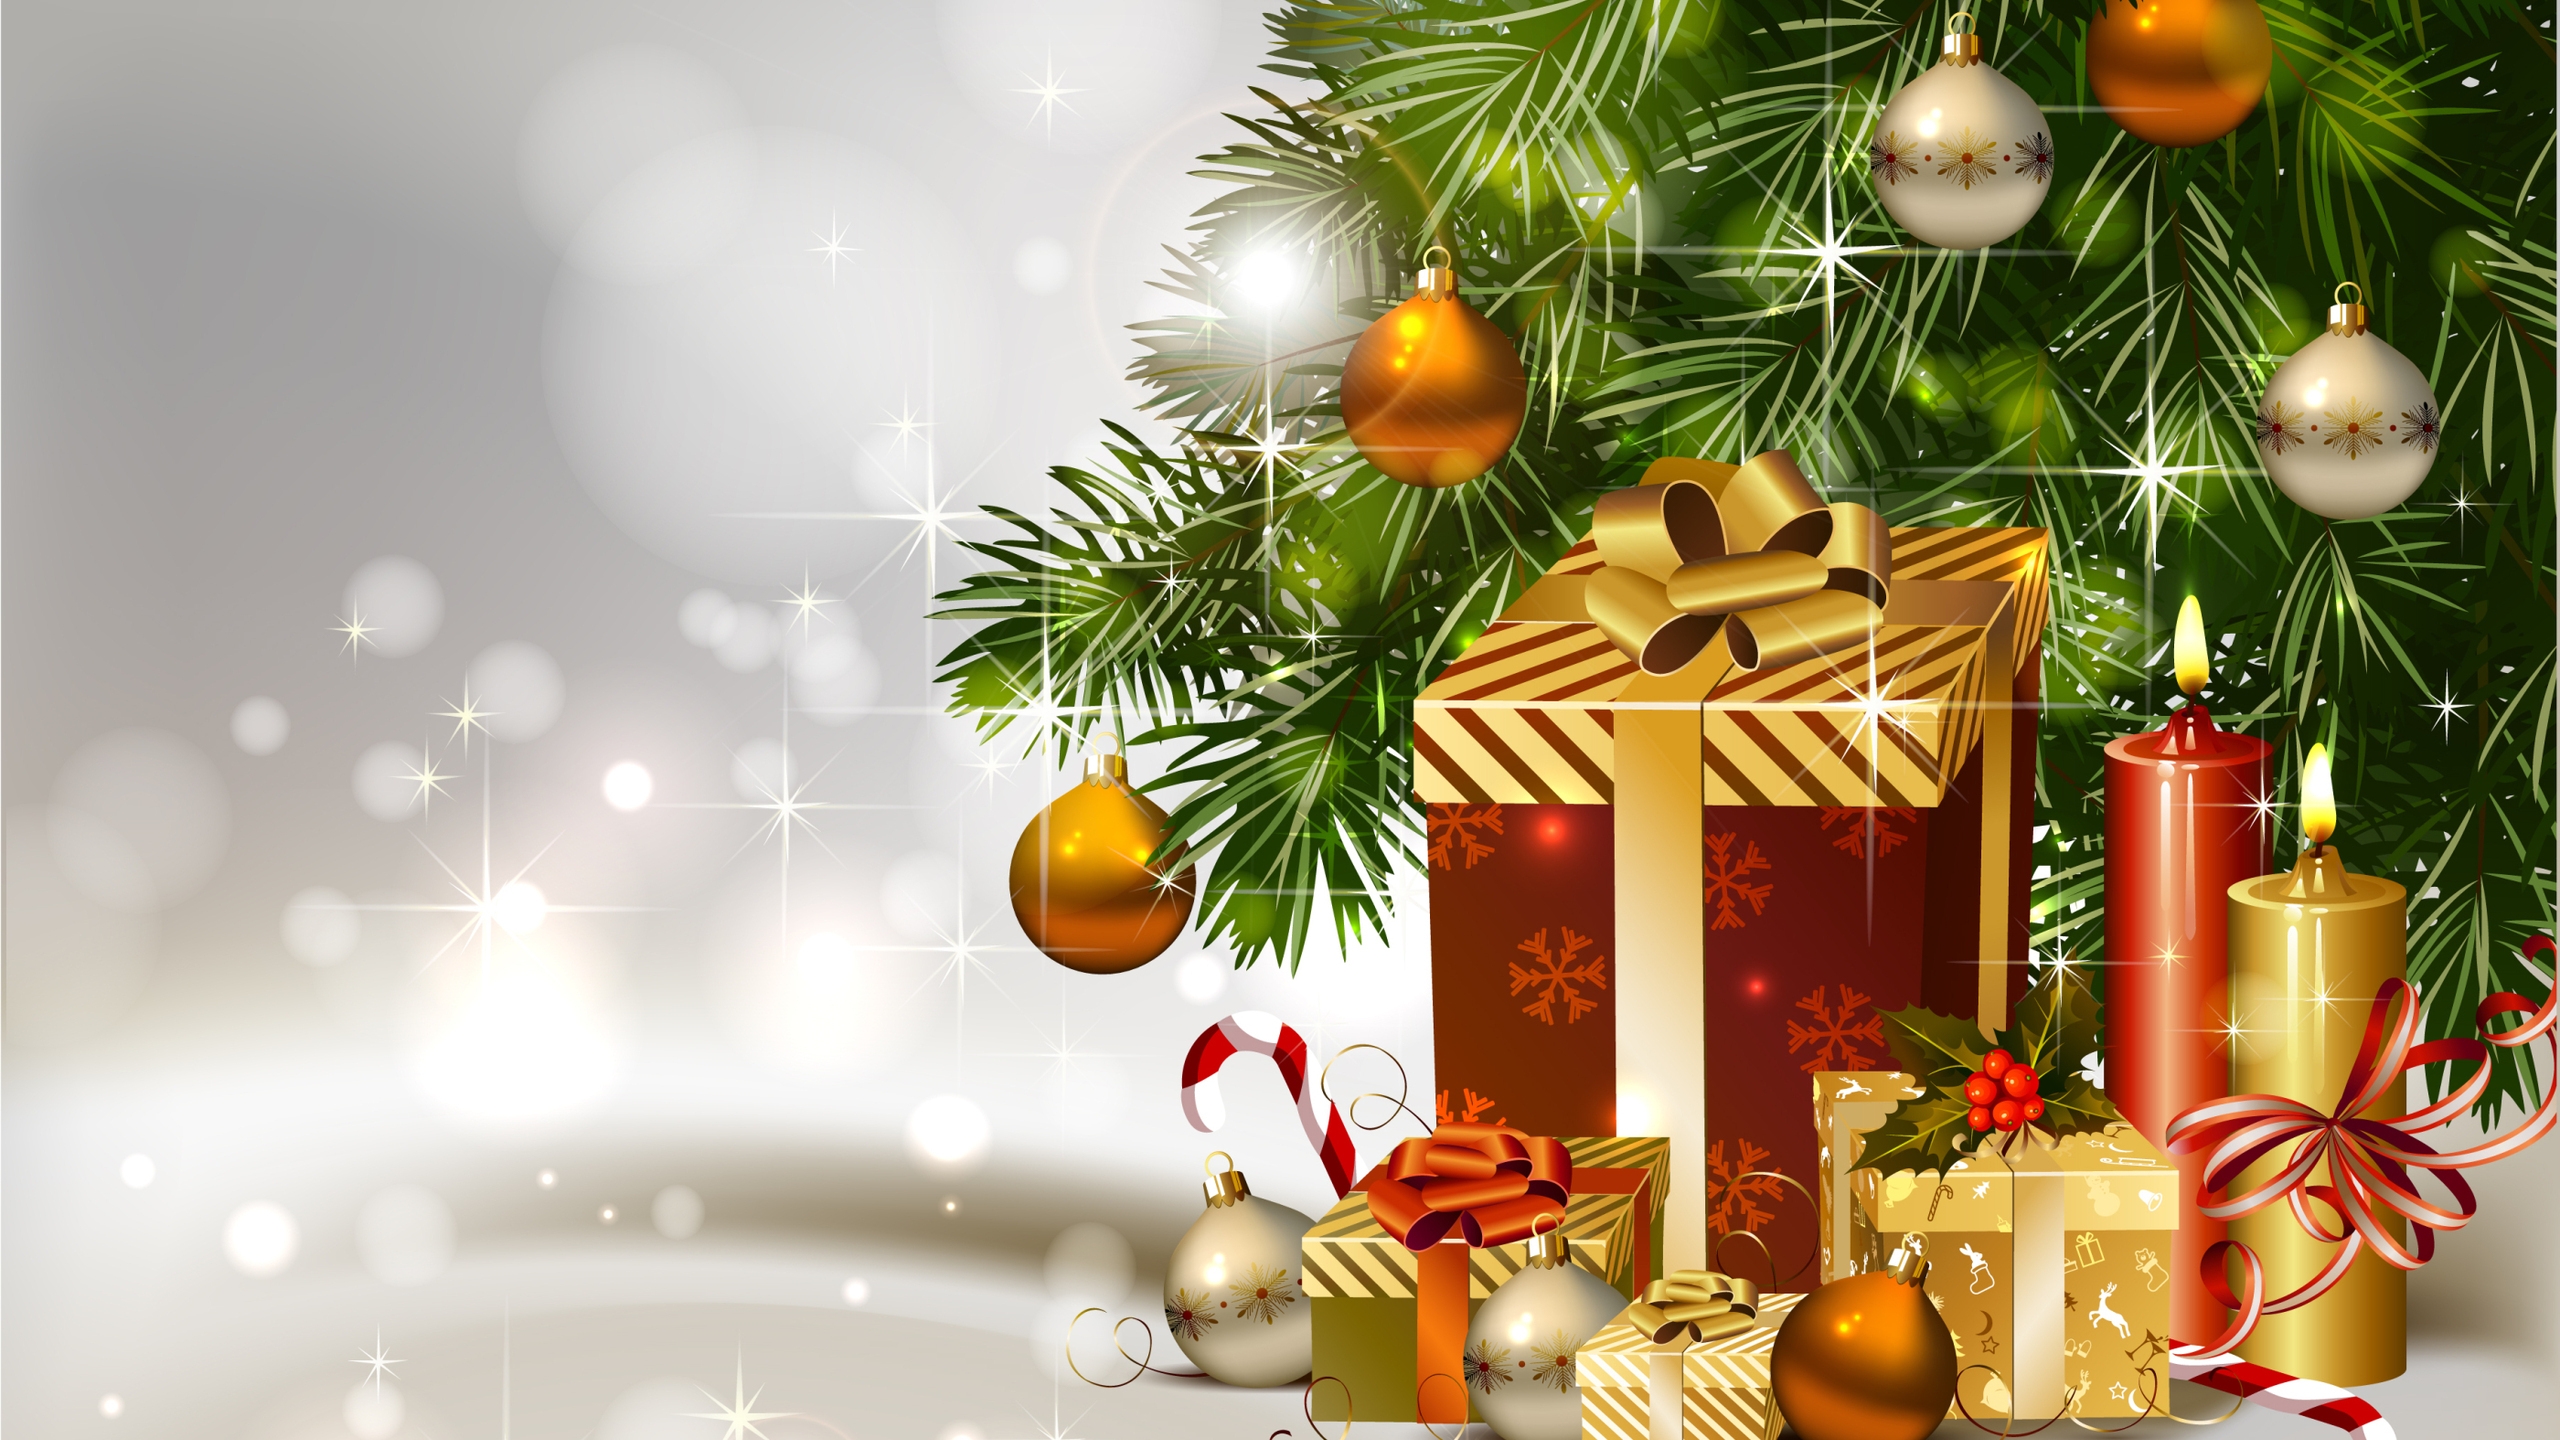 Gifts Under Christmas Tree for 2560x1440 HDTV resolution